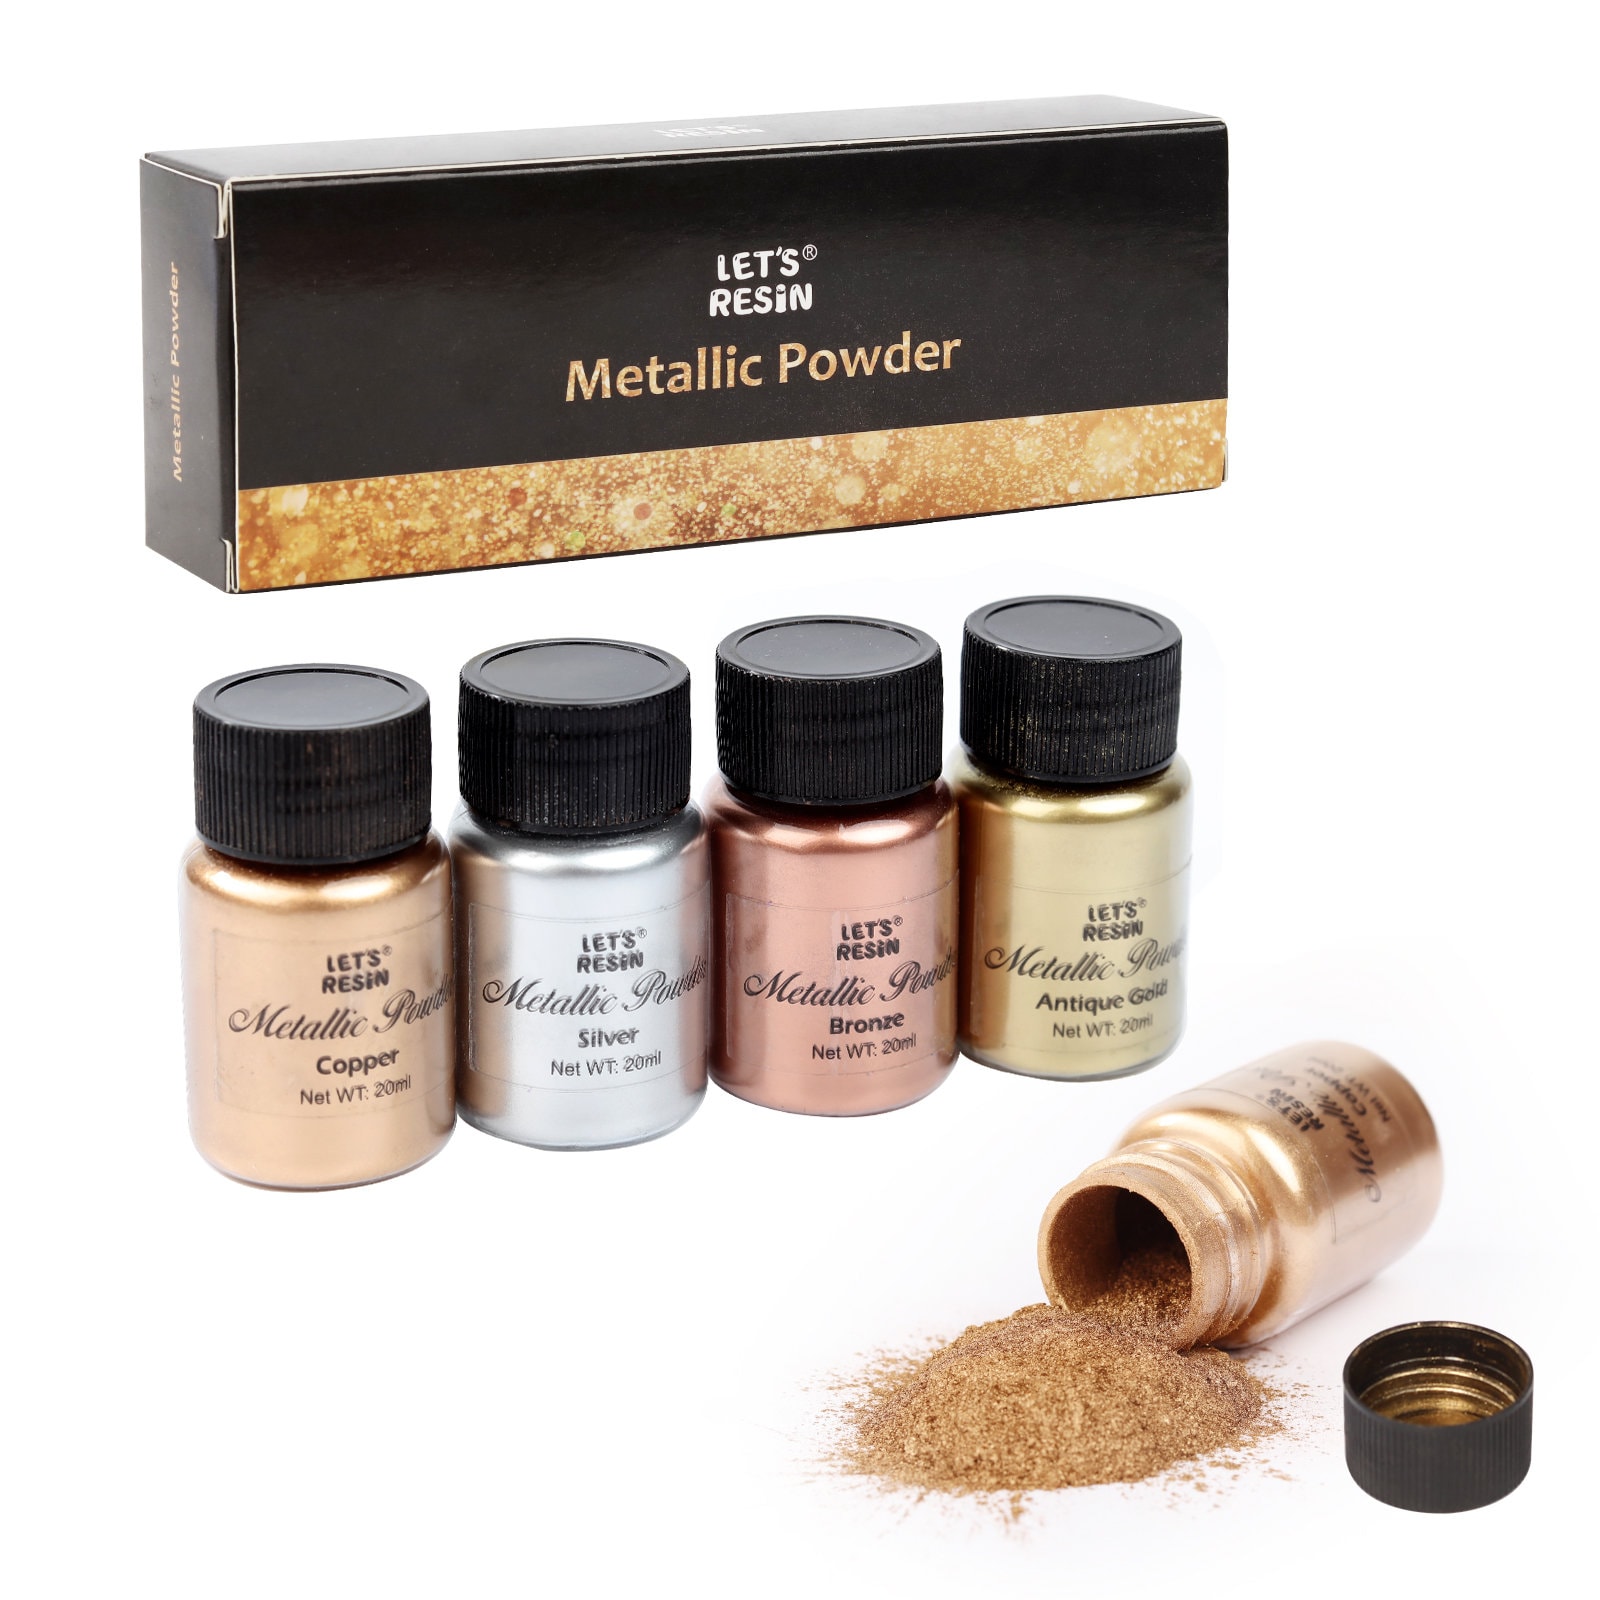 MEYSPRING Geode Art Collection Epoxy Resin Color Pigment Sample Set With  Online Course Metallic Pigment, Mica Powder, and Fine Glitter 